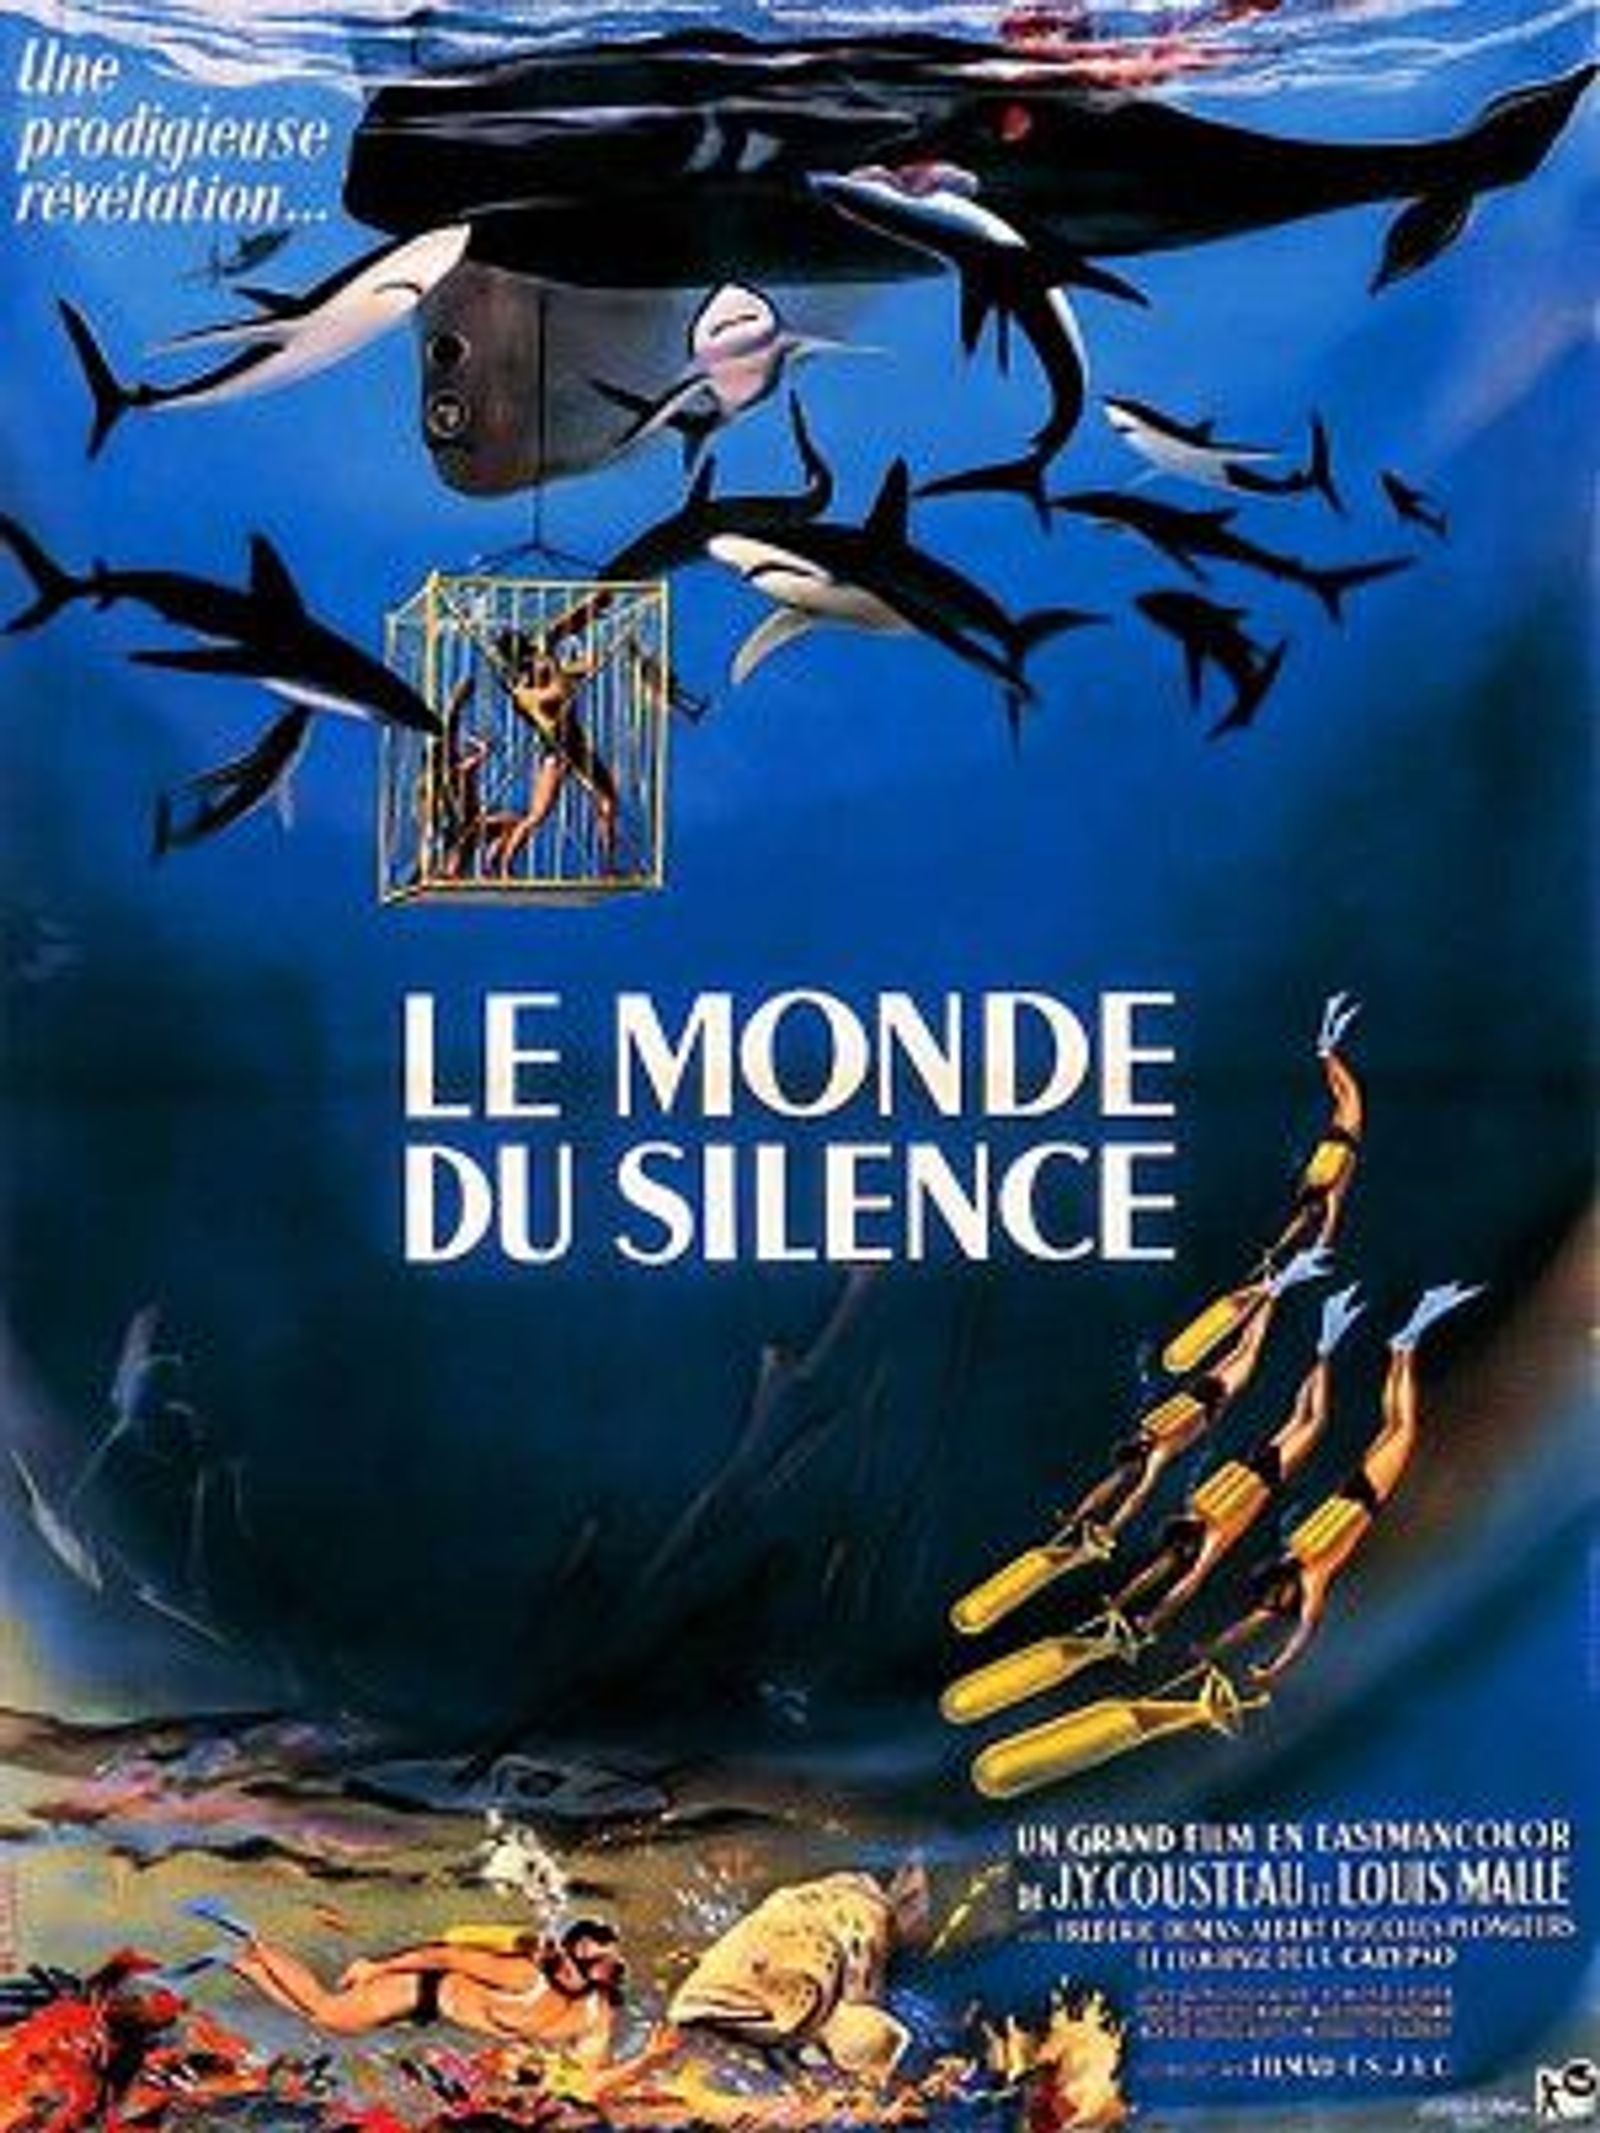 Poster from Silent World by Jacques-Yves Cousteau and Louis Malle -  Festival de Cannes